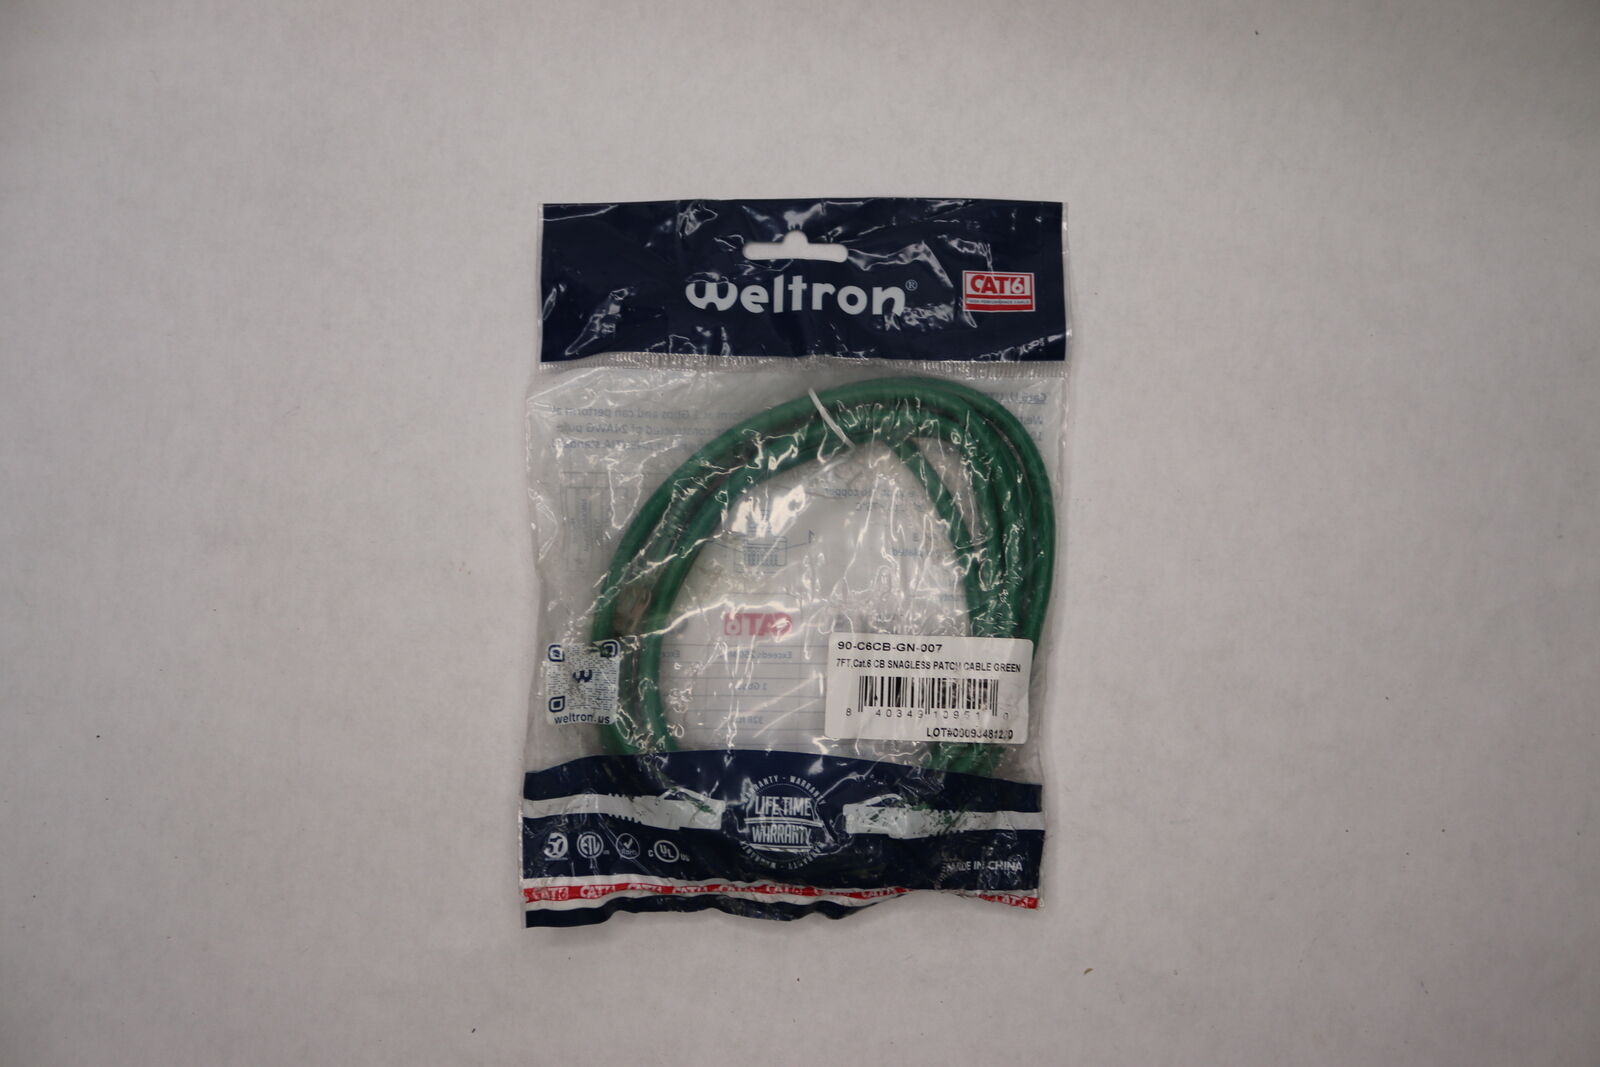 Weltron Cat6 Clear Easy Tab Patch Cable Green 7' 90-C6CB-GN-007